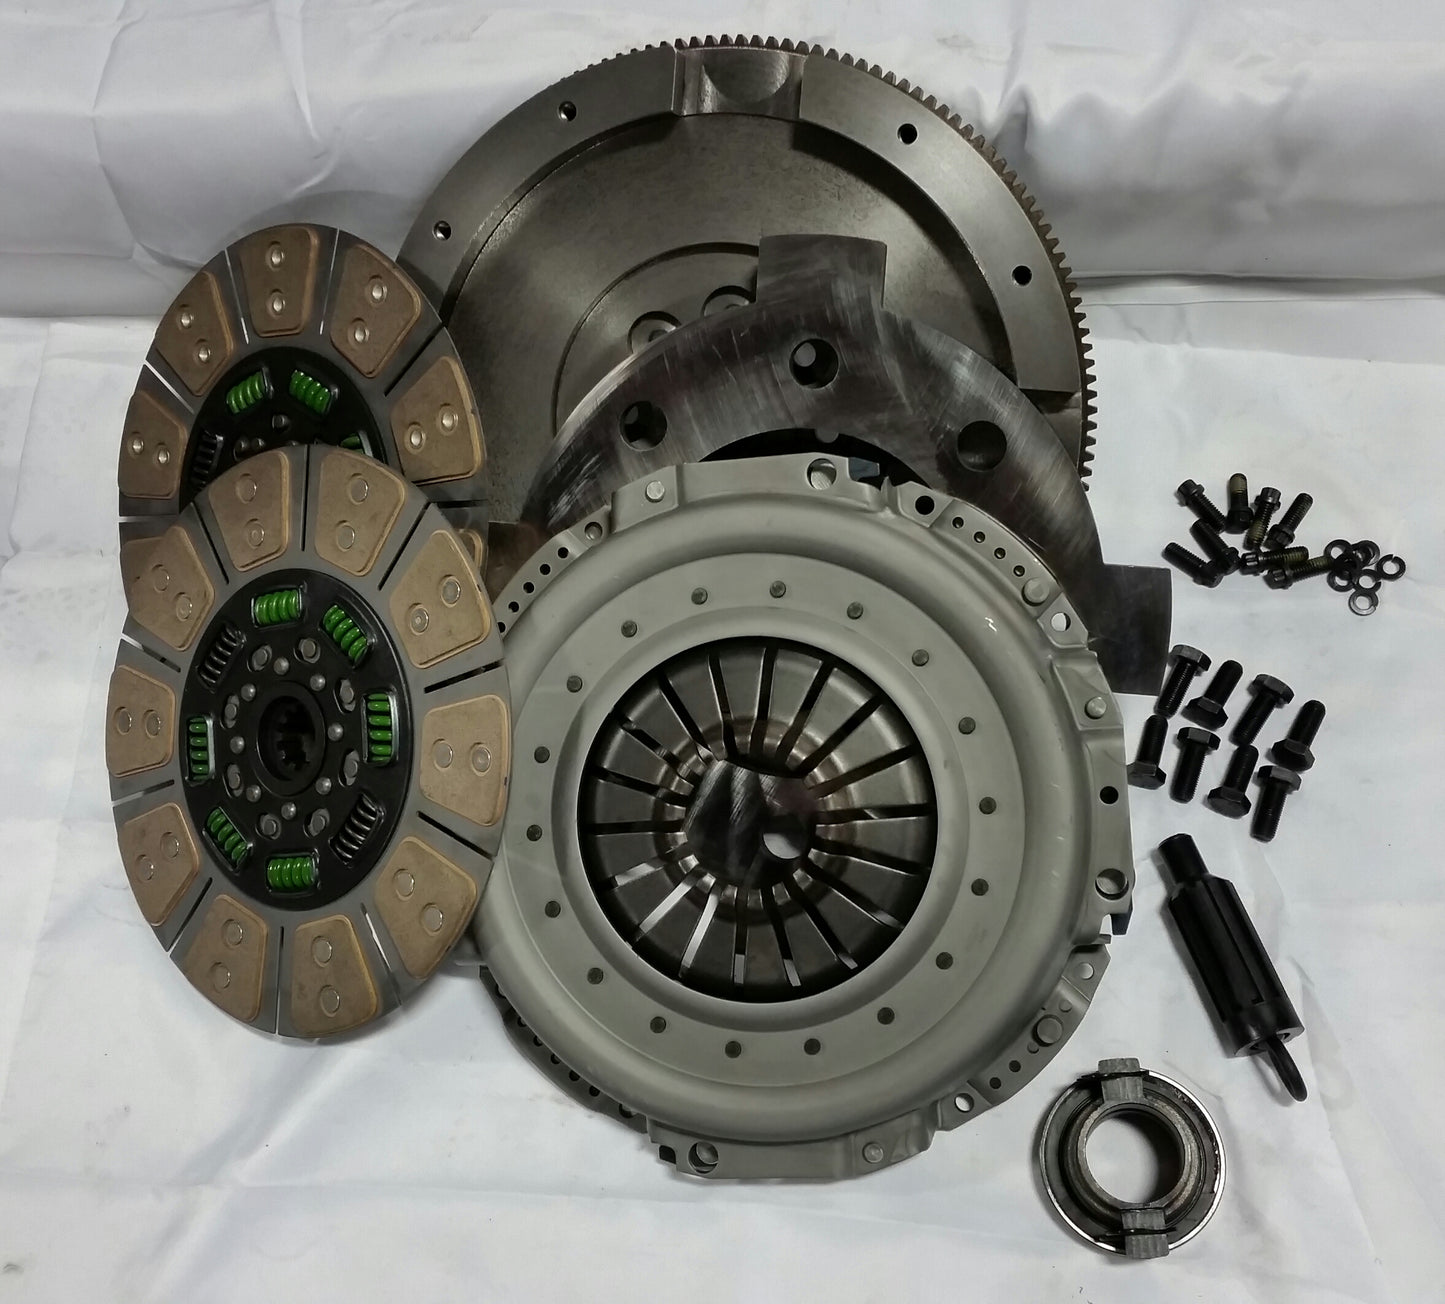 NMU70NV45DDSN Valair Dual Disc 13" Clutch 1994-2003 Dodge NV4500 & Getrag 5 Speed 13" x 1.375" (Requires 1-3/8" Input Shaft) Ceramic Buttons Hell On Wheels Canada